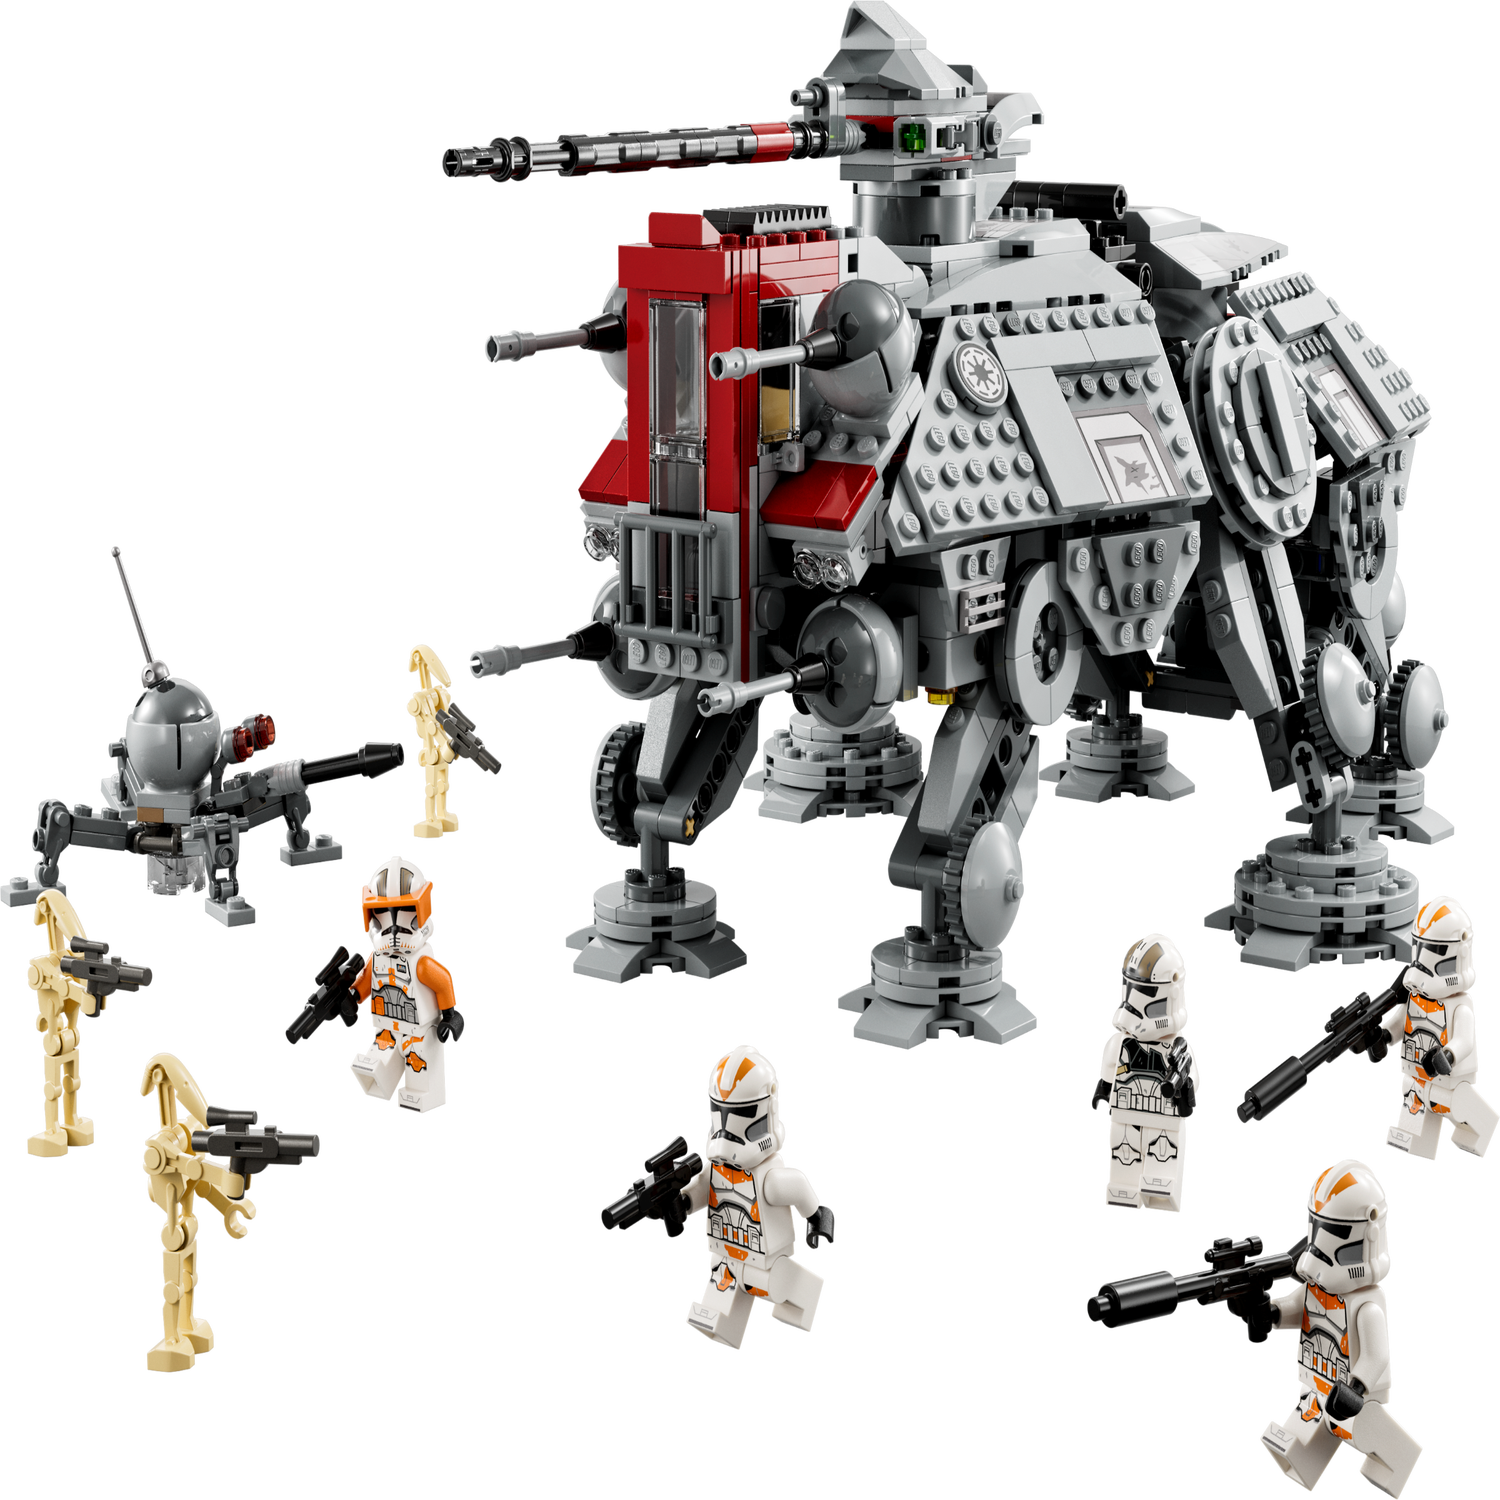 LEGO Star Wars 75337 Le Marcheur AT-TE